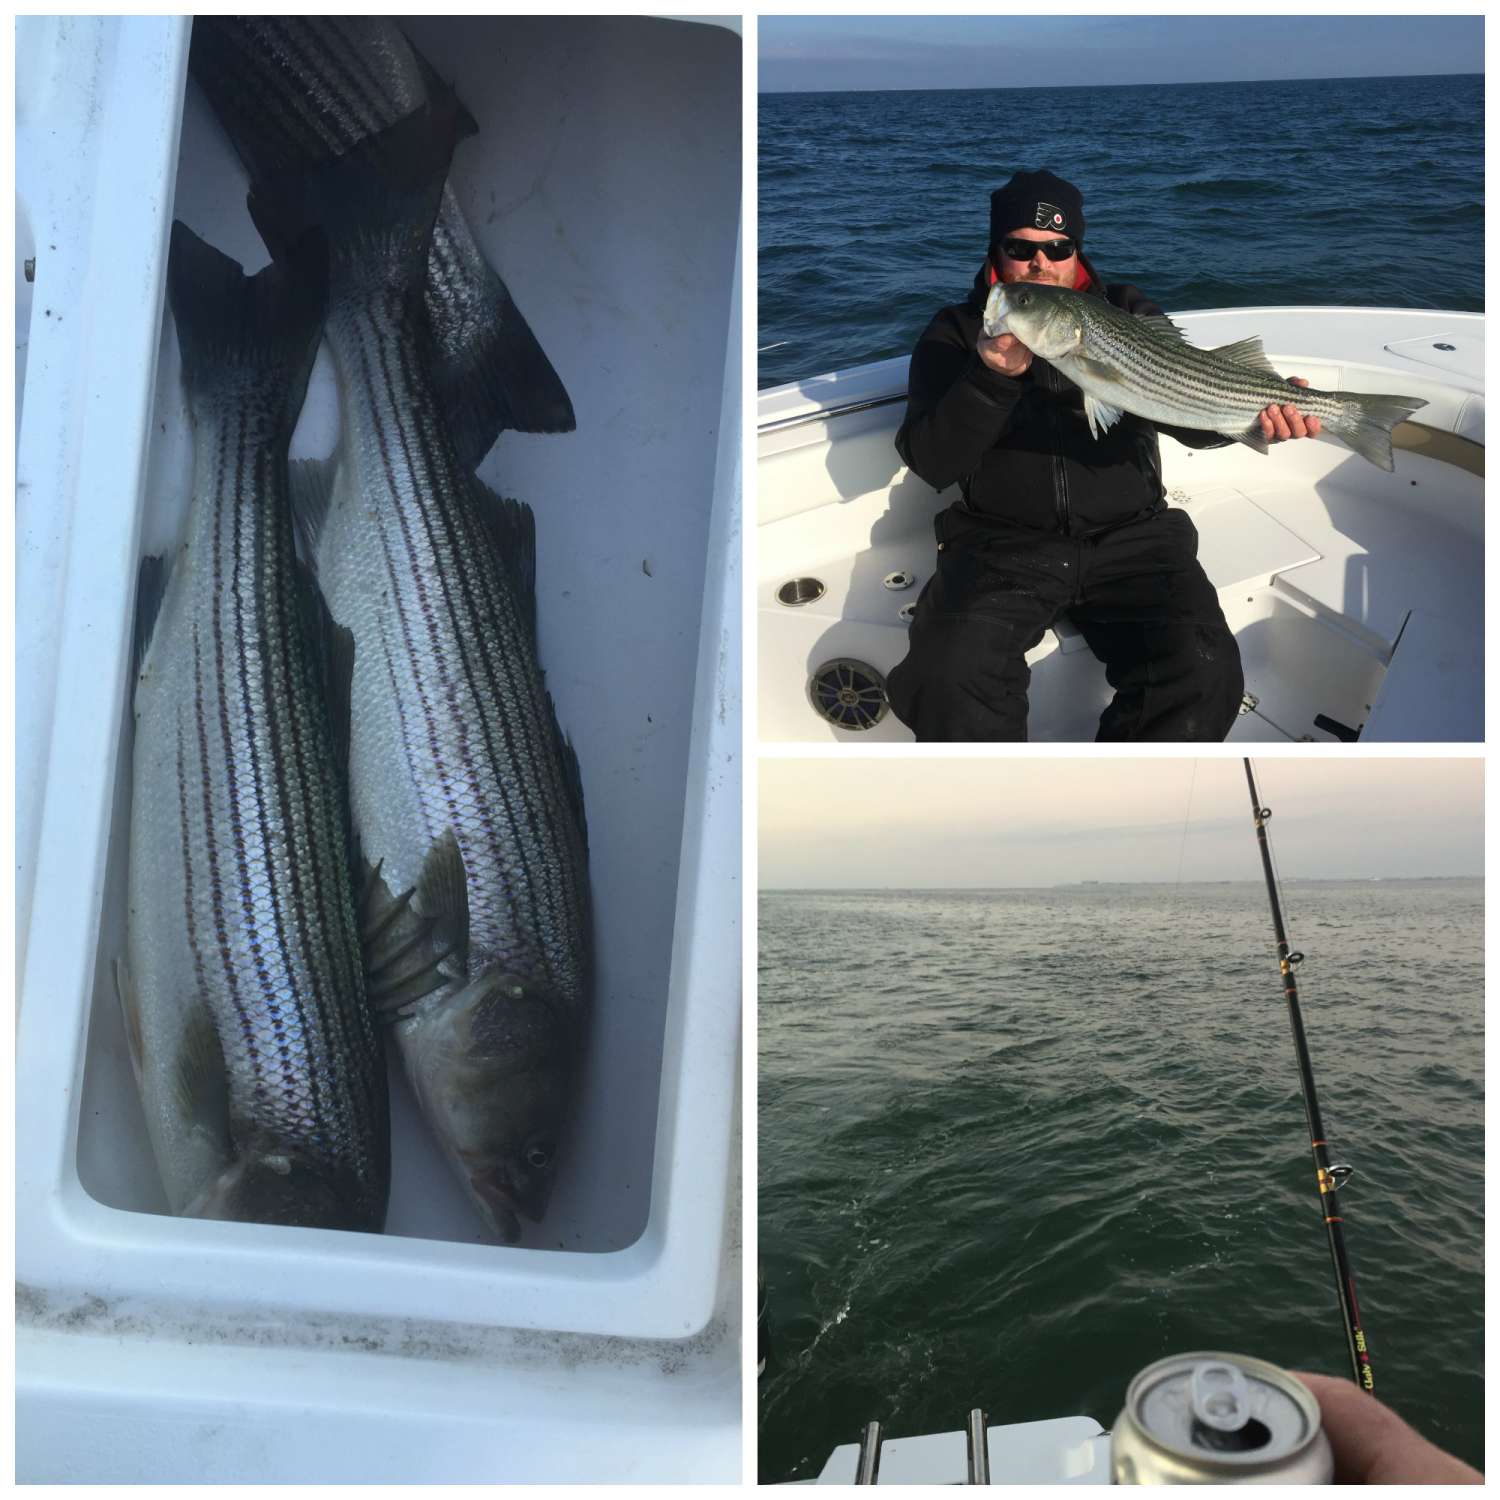 Great December Striper trip with 2 friends aboard my Heritage 211.  3 miles off Stone Harbor, NJ .  Had a...